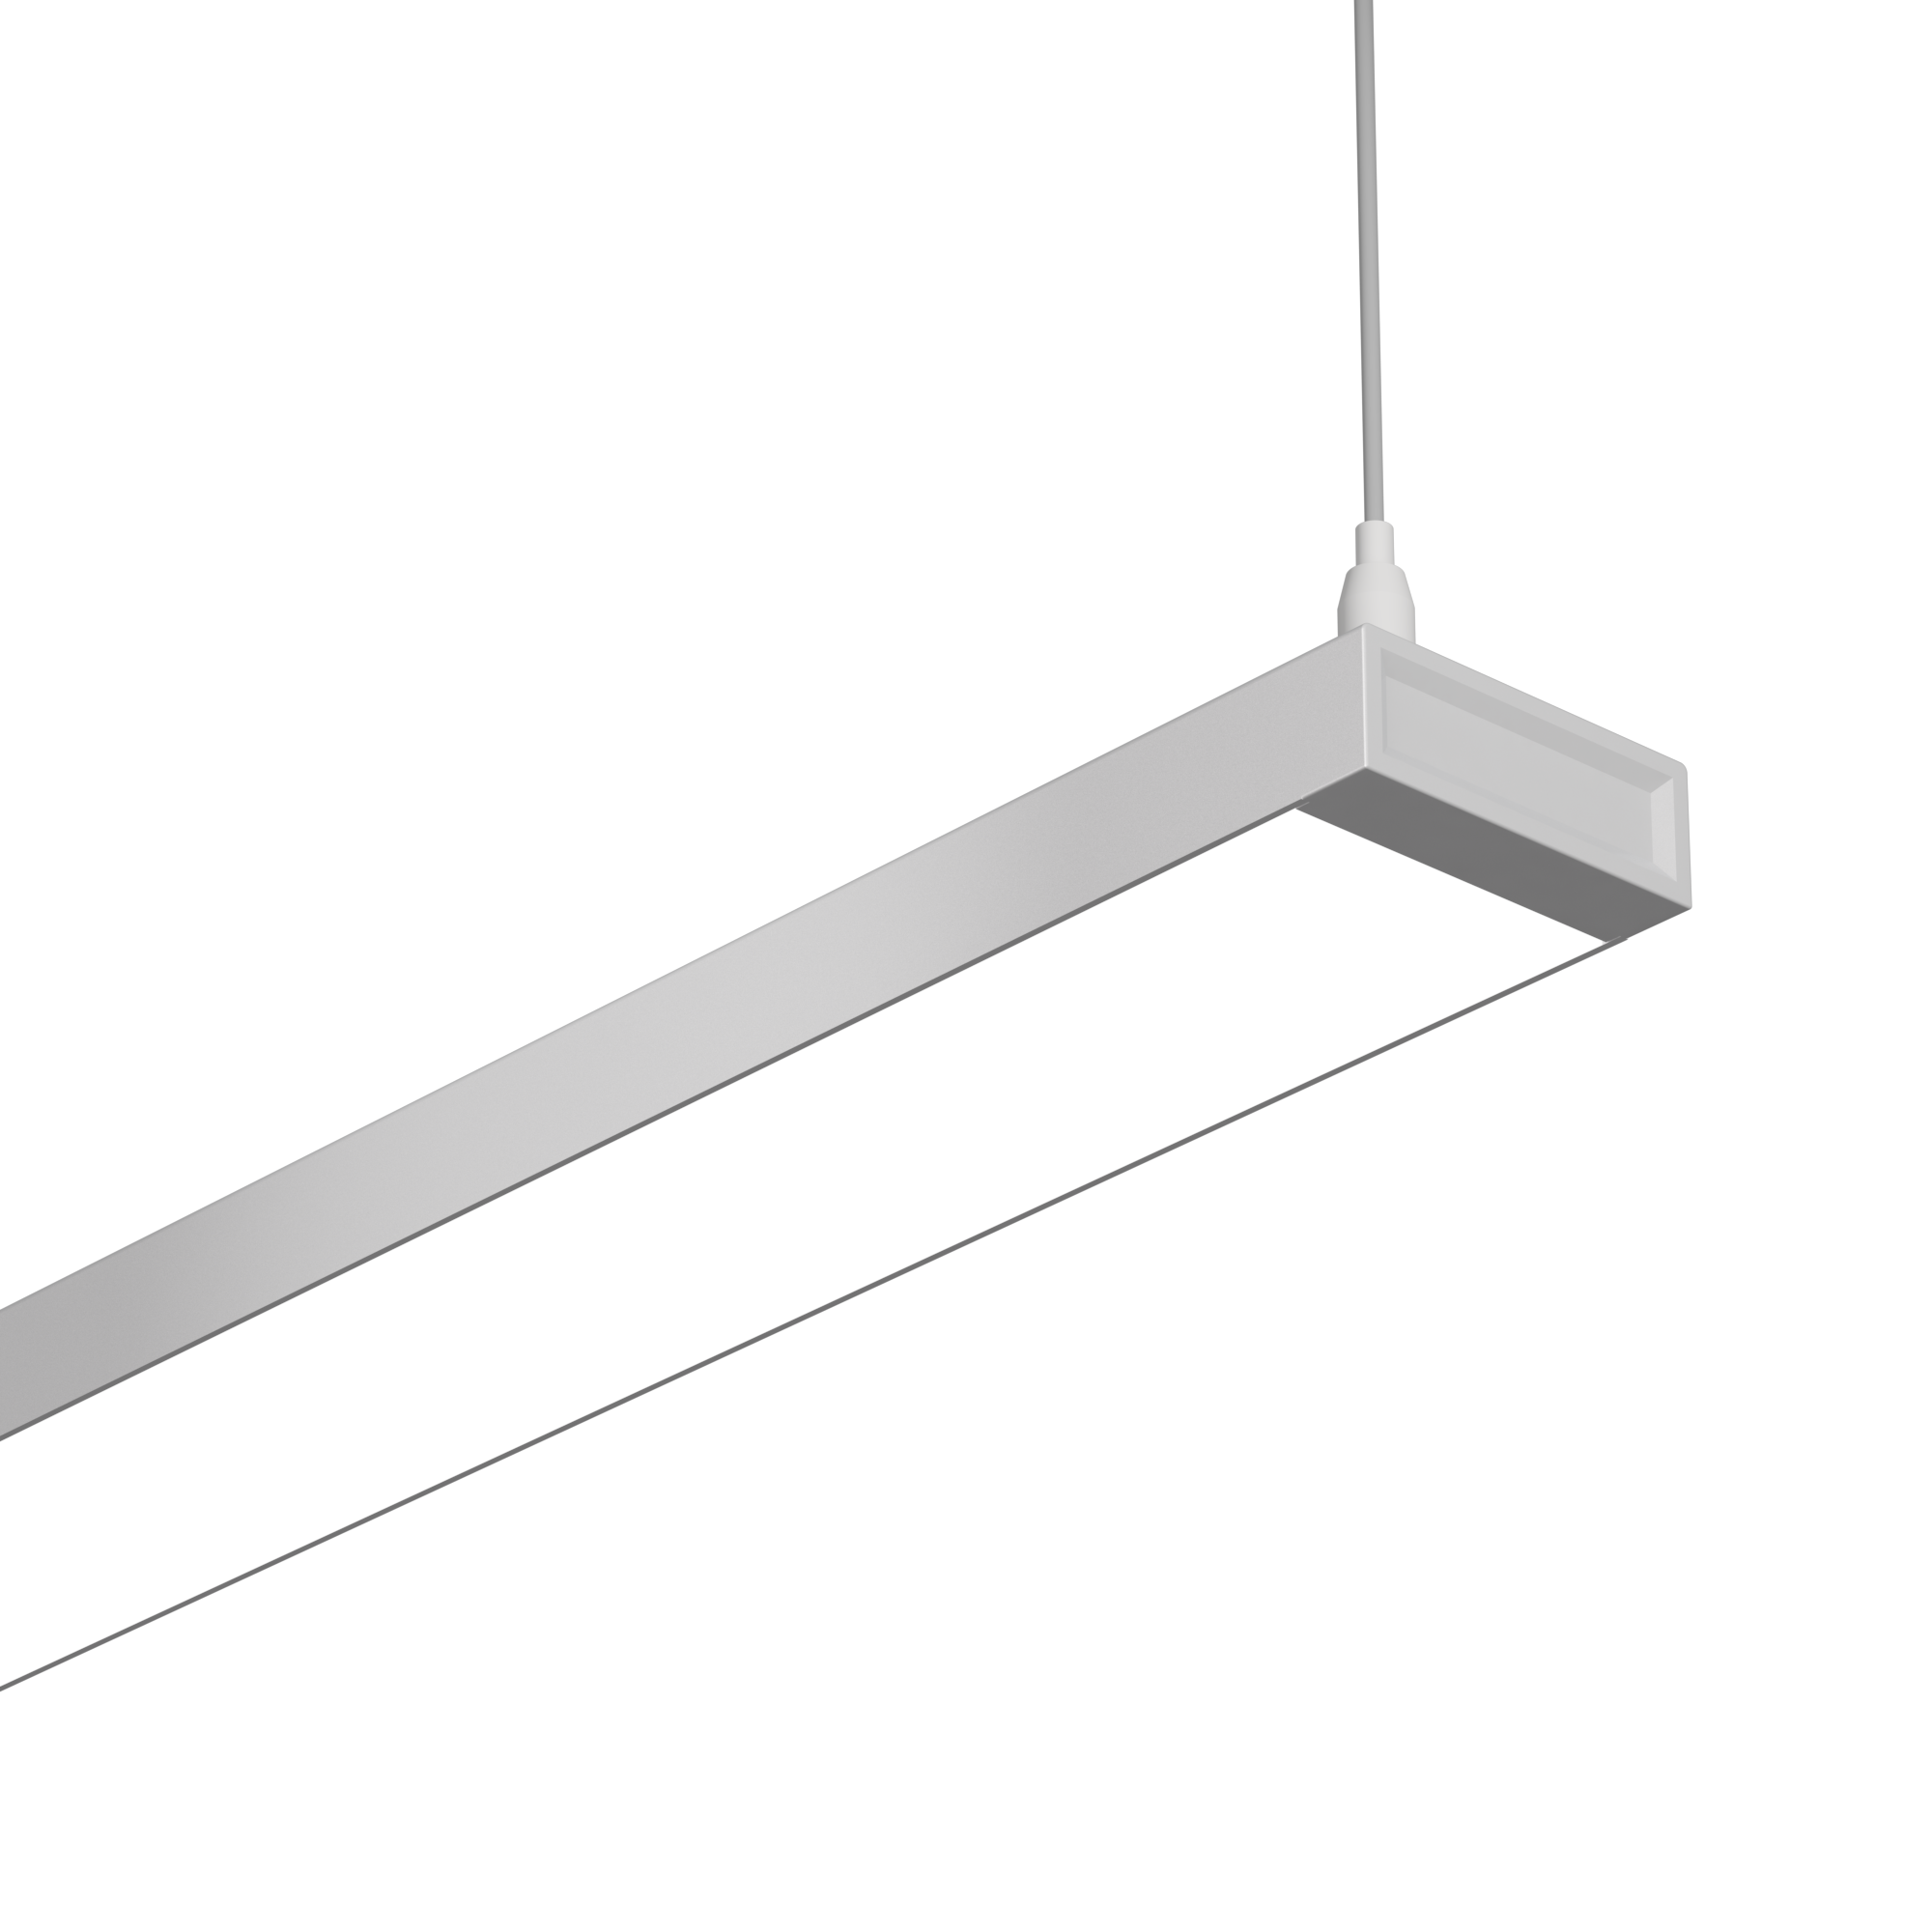 Edge-Lit Low-Profile LED Linear Pendant
EDGESolo 2.75 Pendant is an innovative low-profile LED luminaire designed to provide the perfect direct and indirect light. EDGE products all provide best-in-class efficiency and beam control options. Solo 275 is specification-grade with high lumen per foot, high CRI, and circadian options. Solo 275 incorporates an engineered LED light engine with fully customizable choices for lumen output, CCT, and CRI.